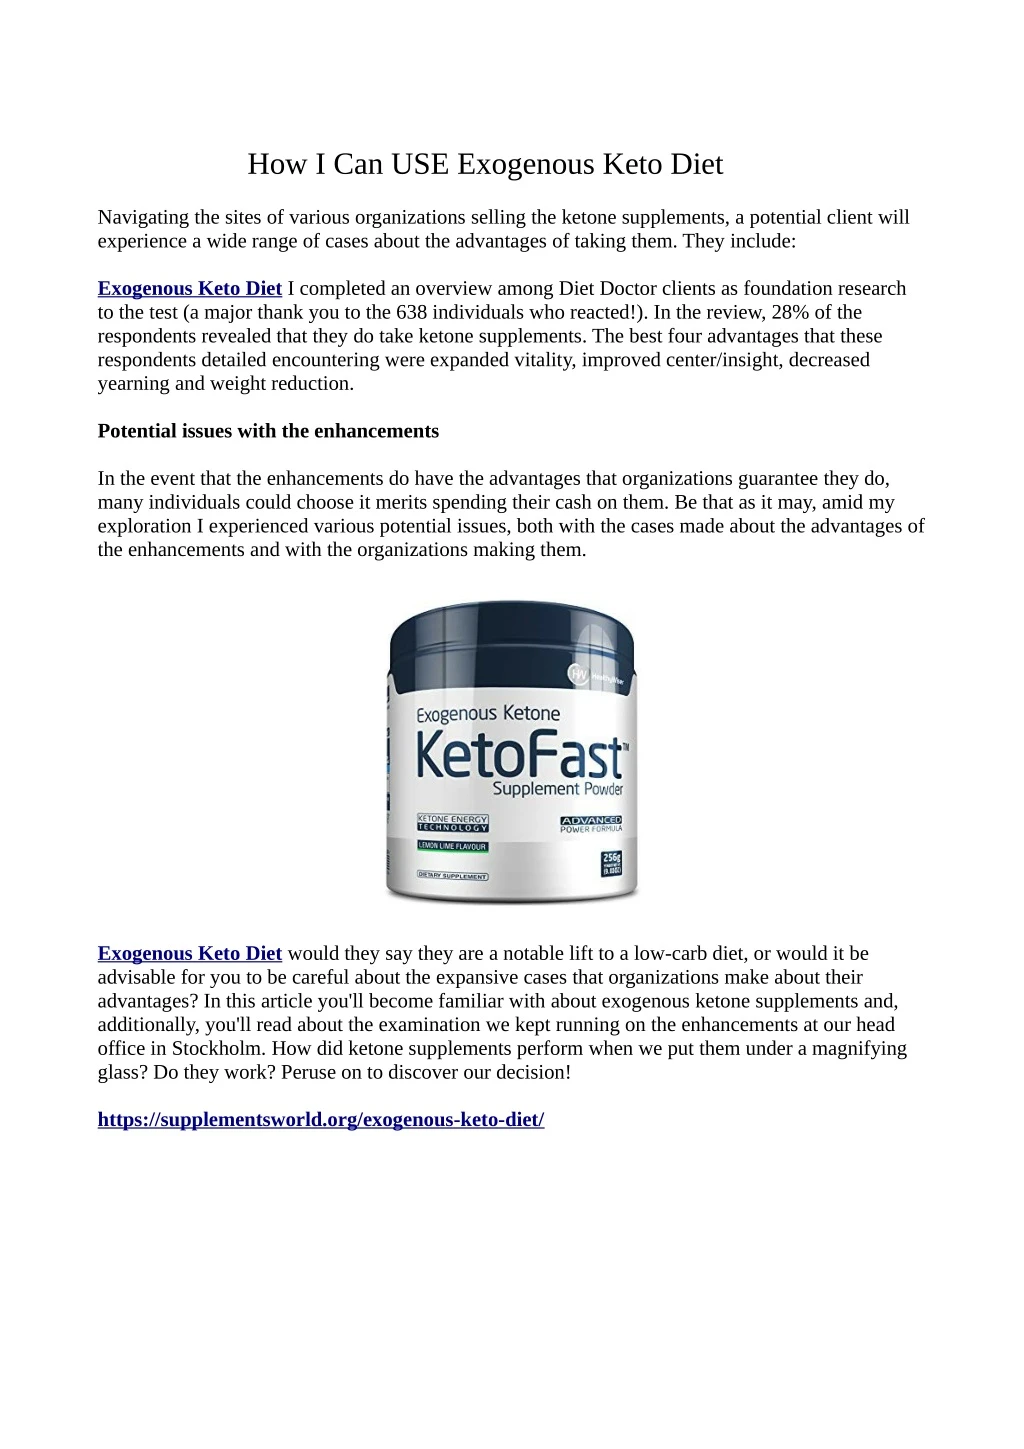 how i can use exogenous keto diet